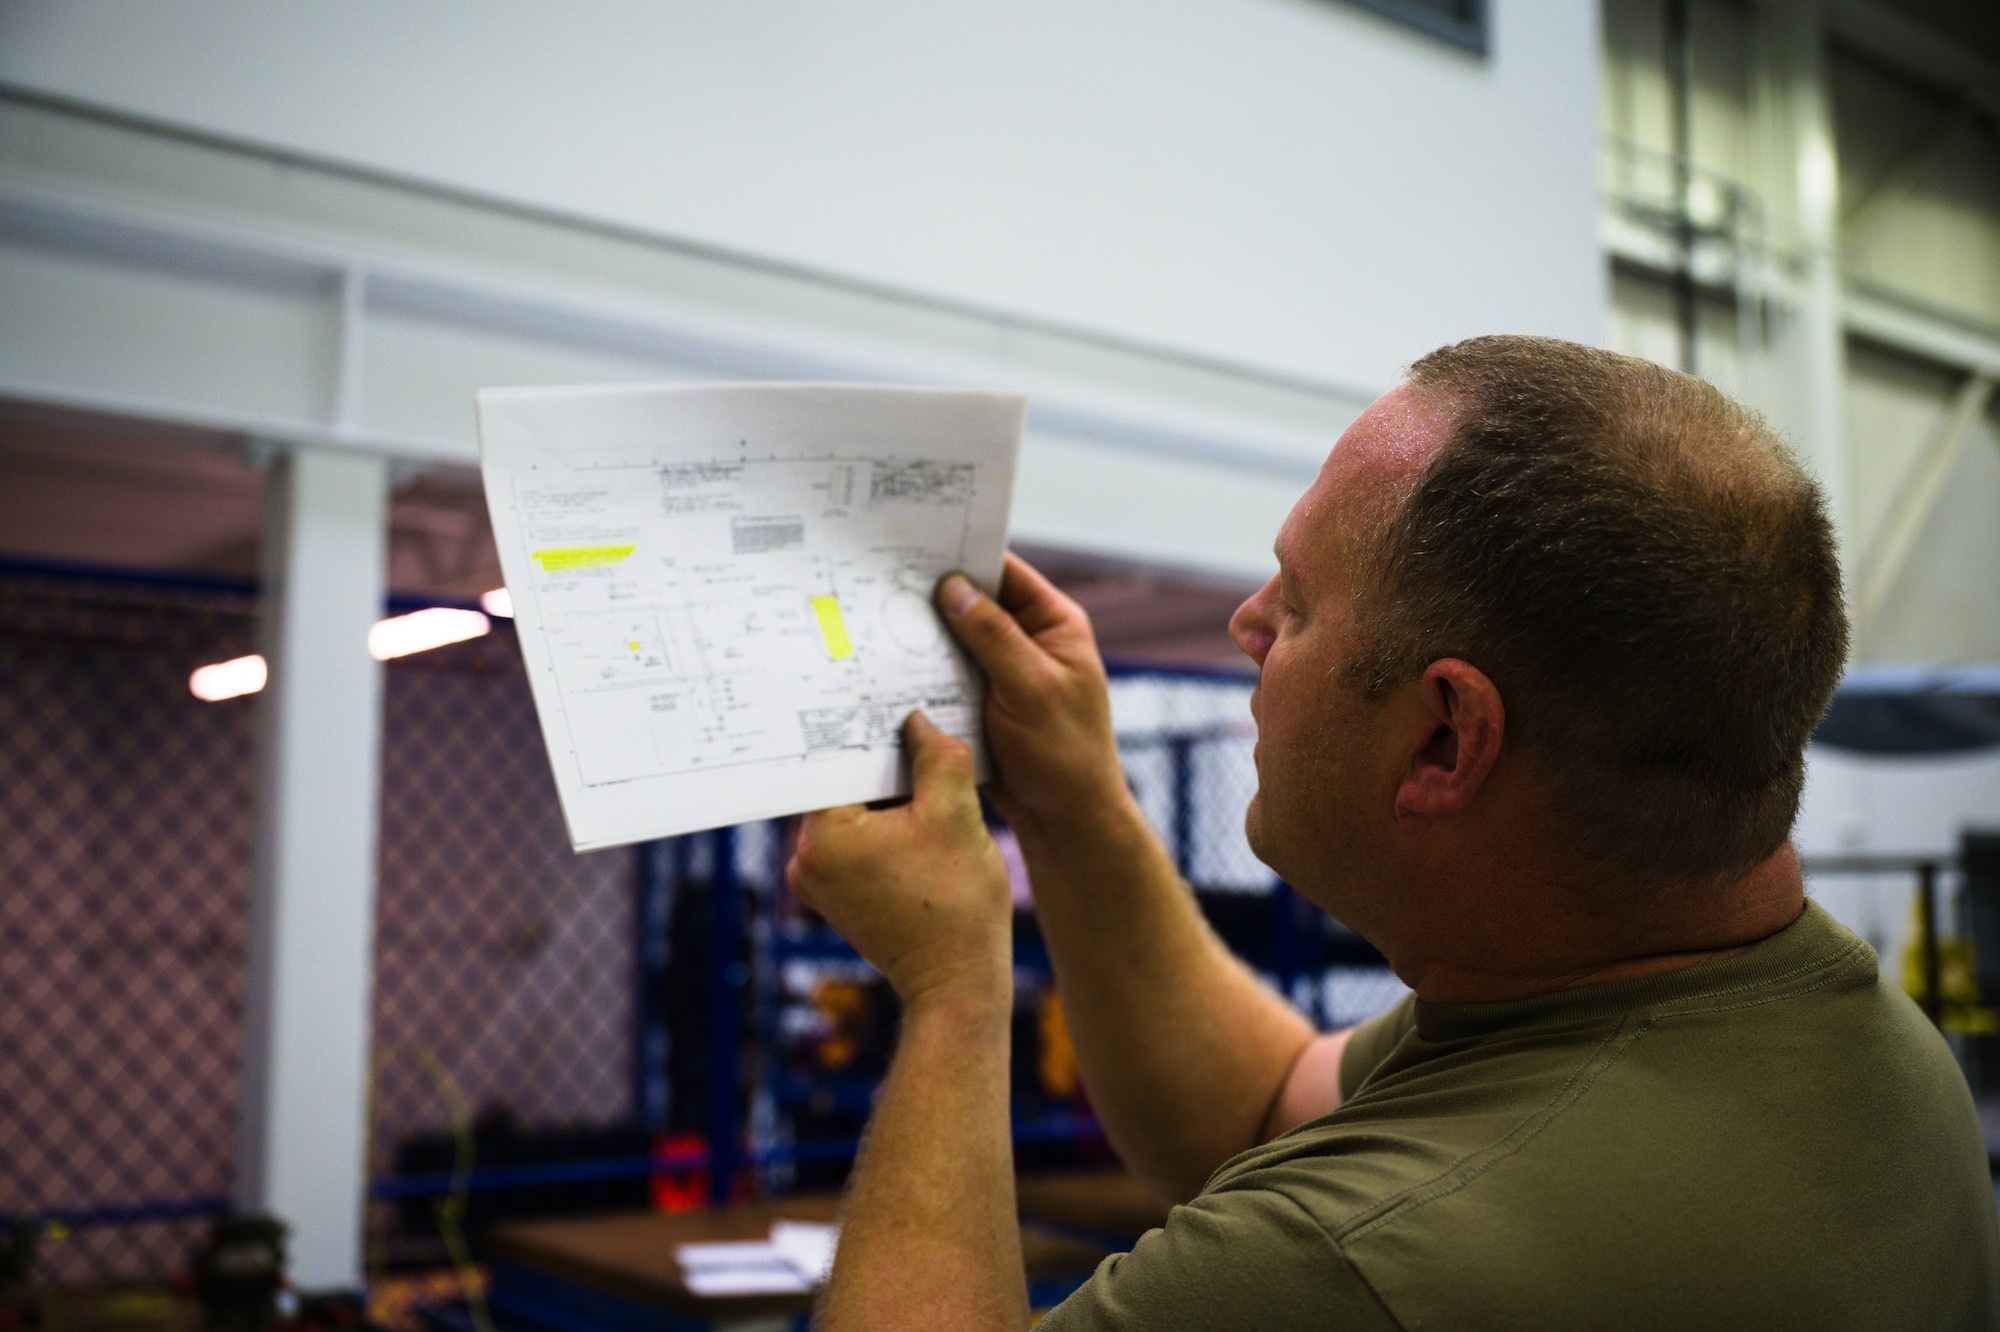 A man in a tan t-shirt holds up an engineering drawing of a bleed air shut-off "football" valve.